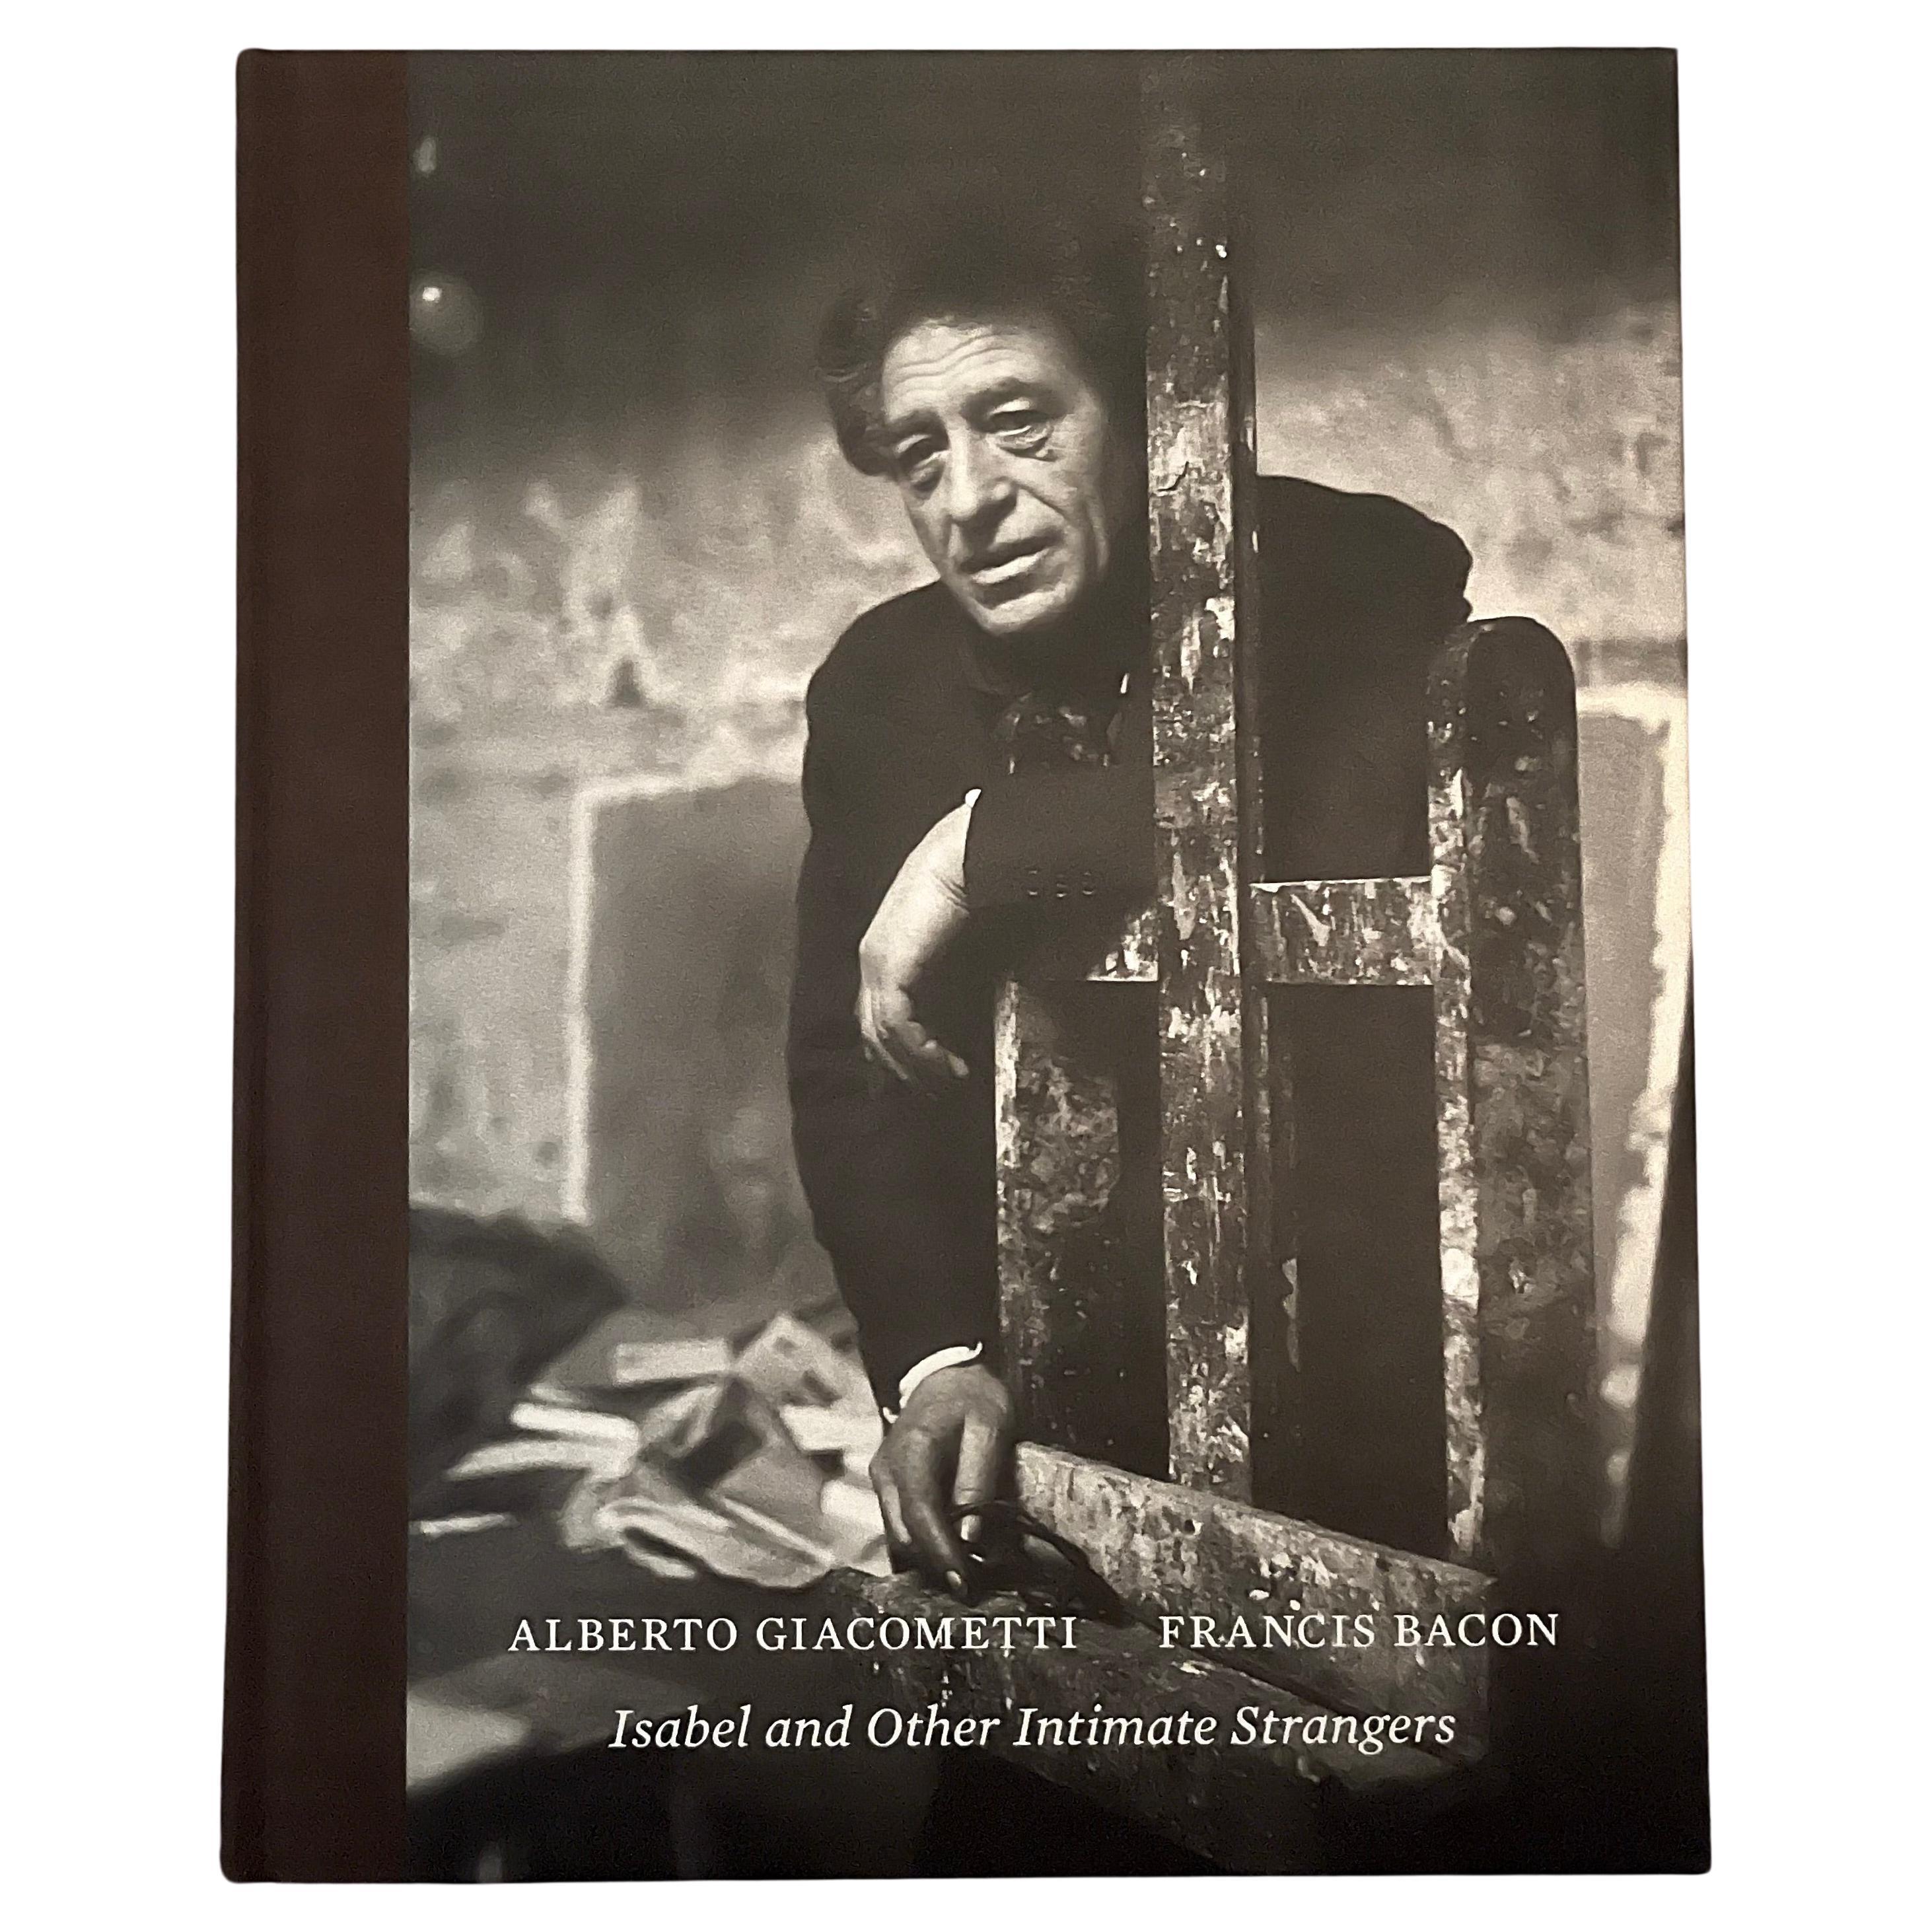 Isabel and Other Intimate Strangers:  Alberto Giacometti and Francis Bacon